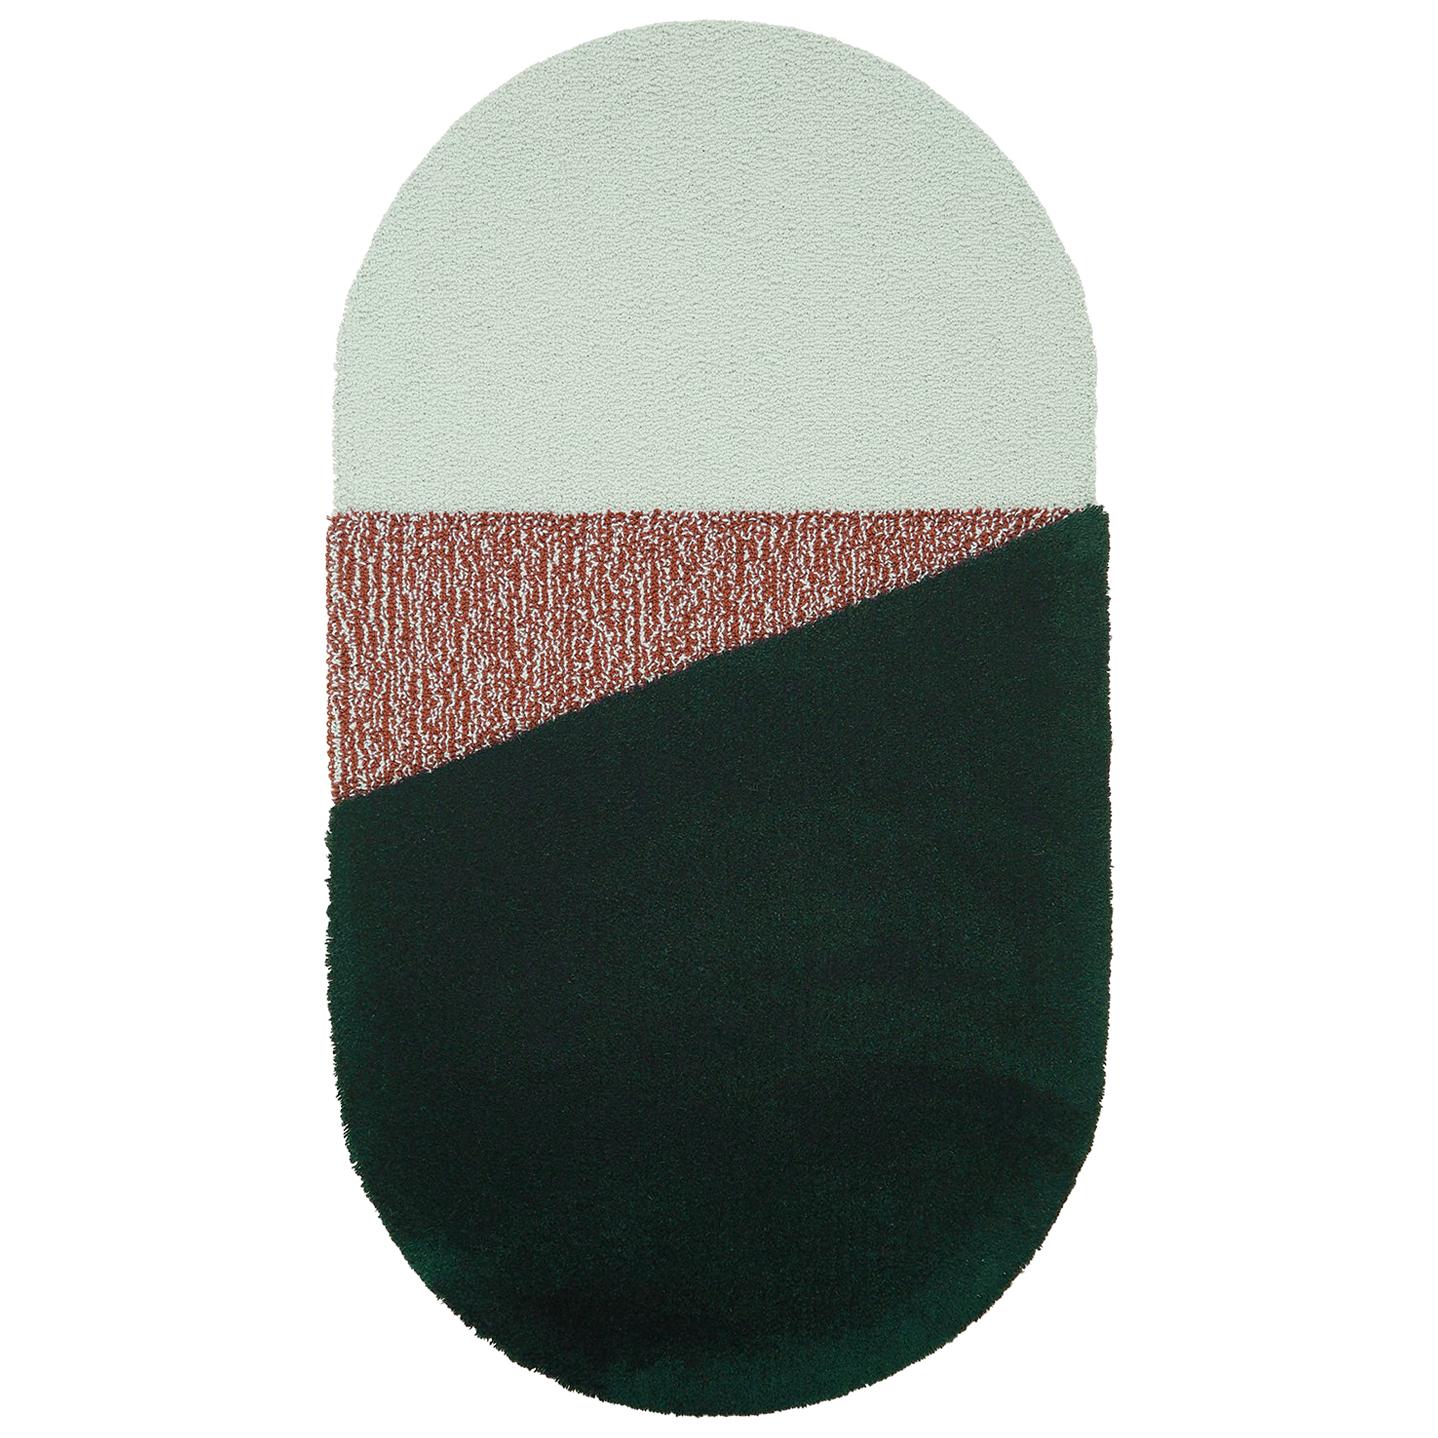 OCI Right M, Rug 100% Wool / Green Brick by Portego For Sale